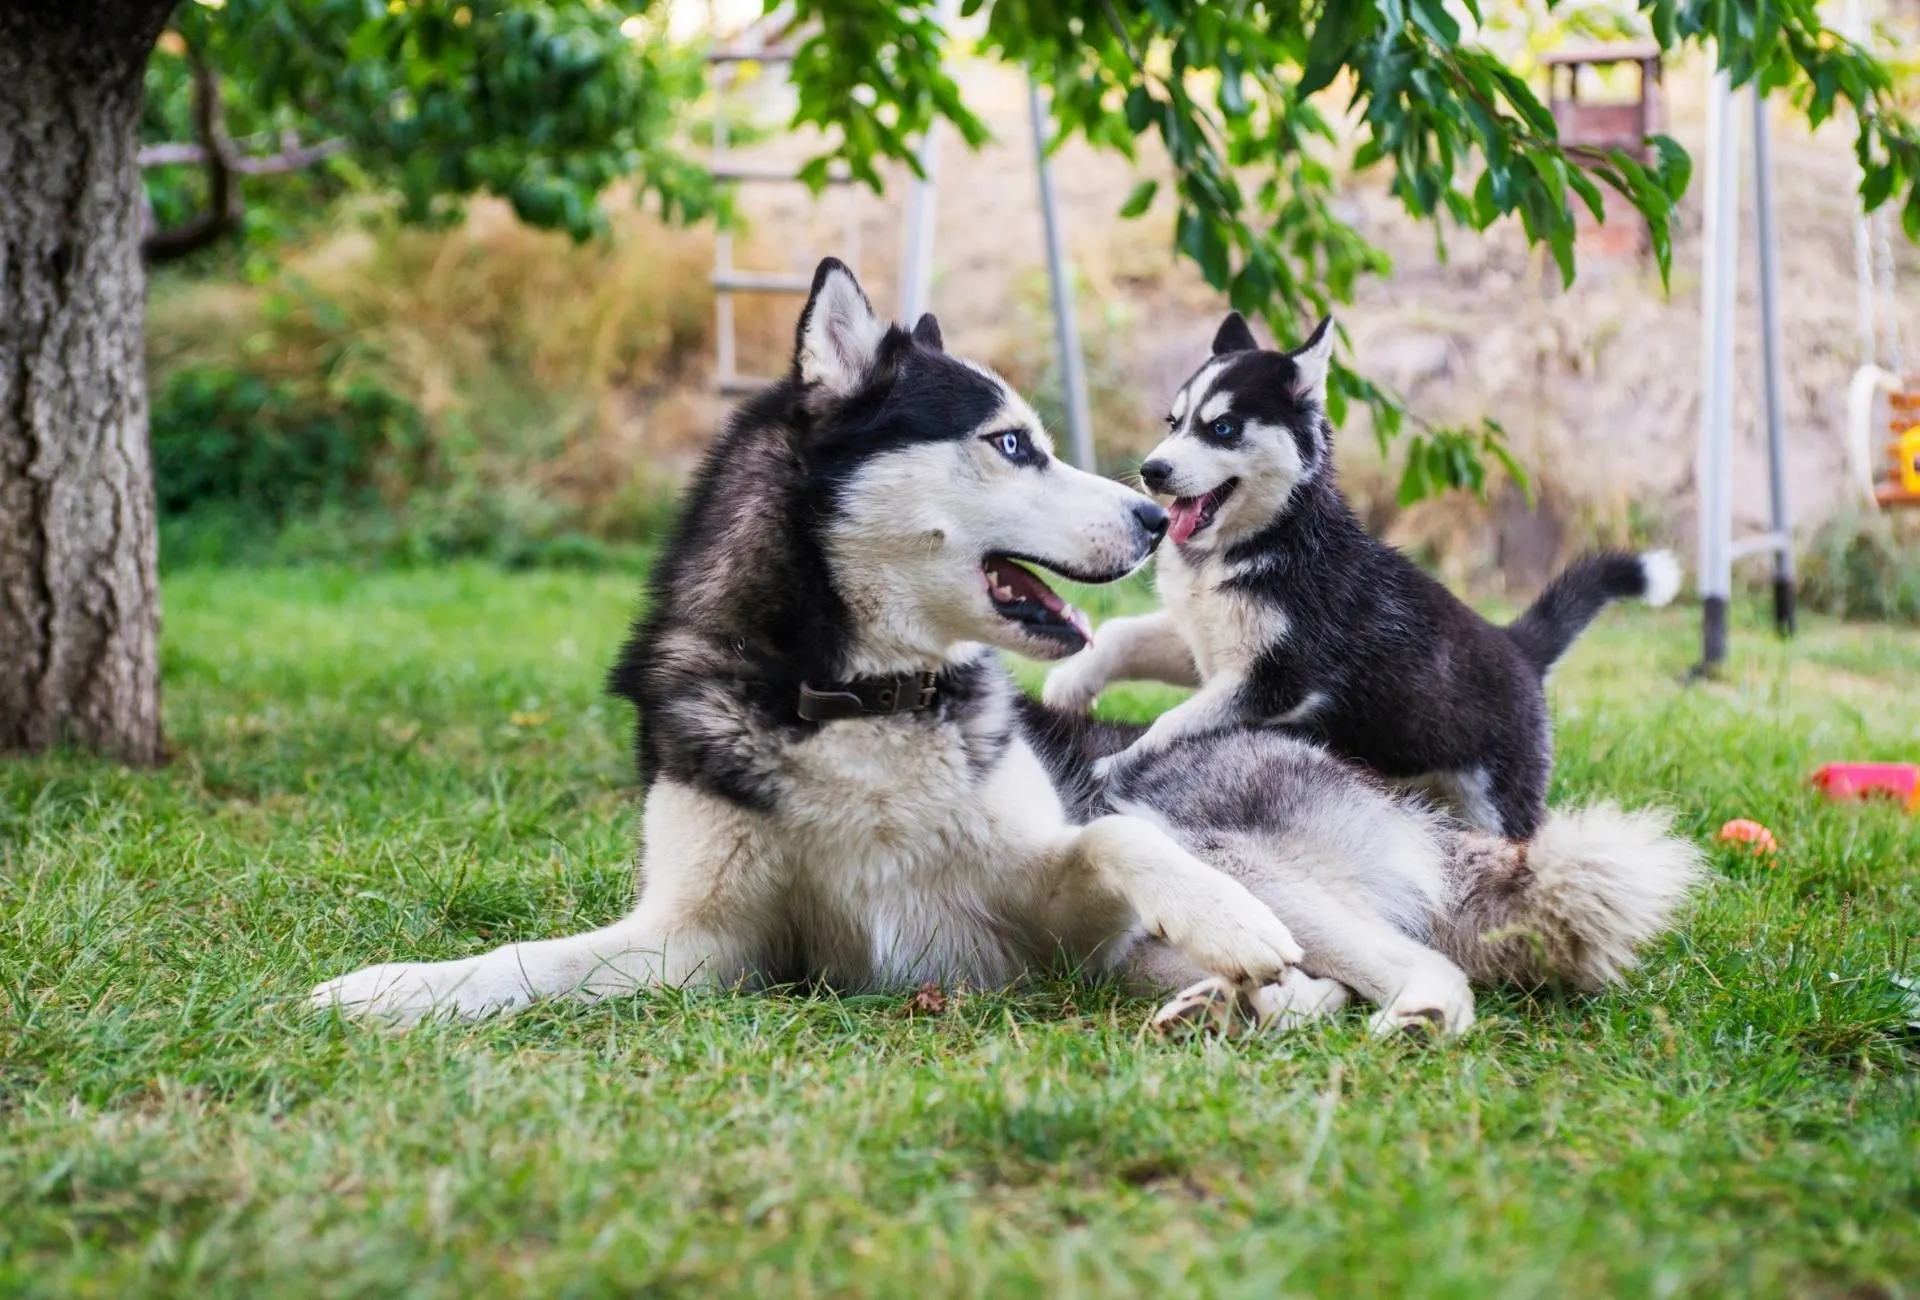 A Husky puppy is sneaking up on an older Husky to interact with their face.